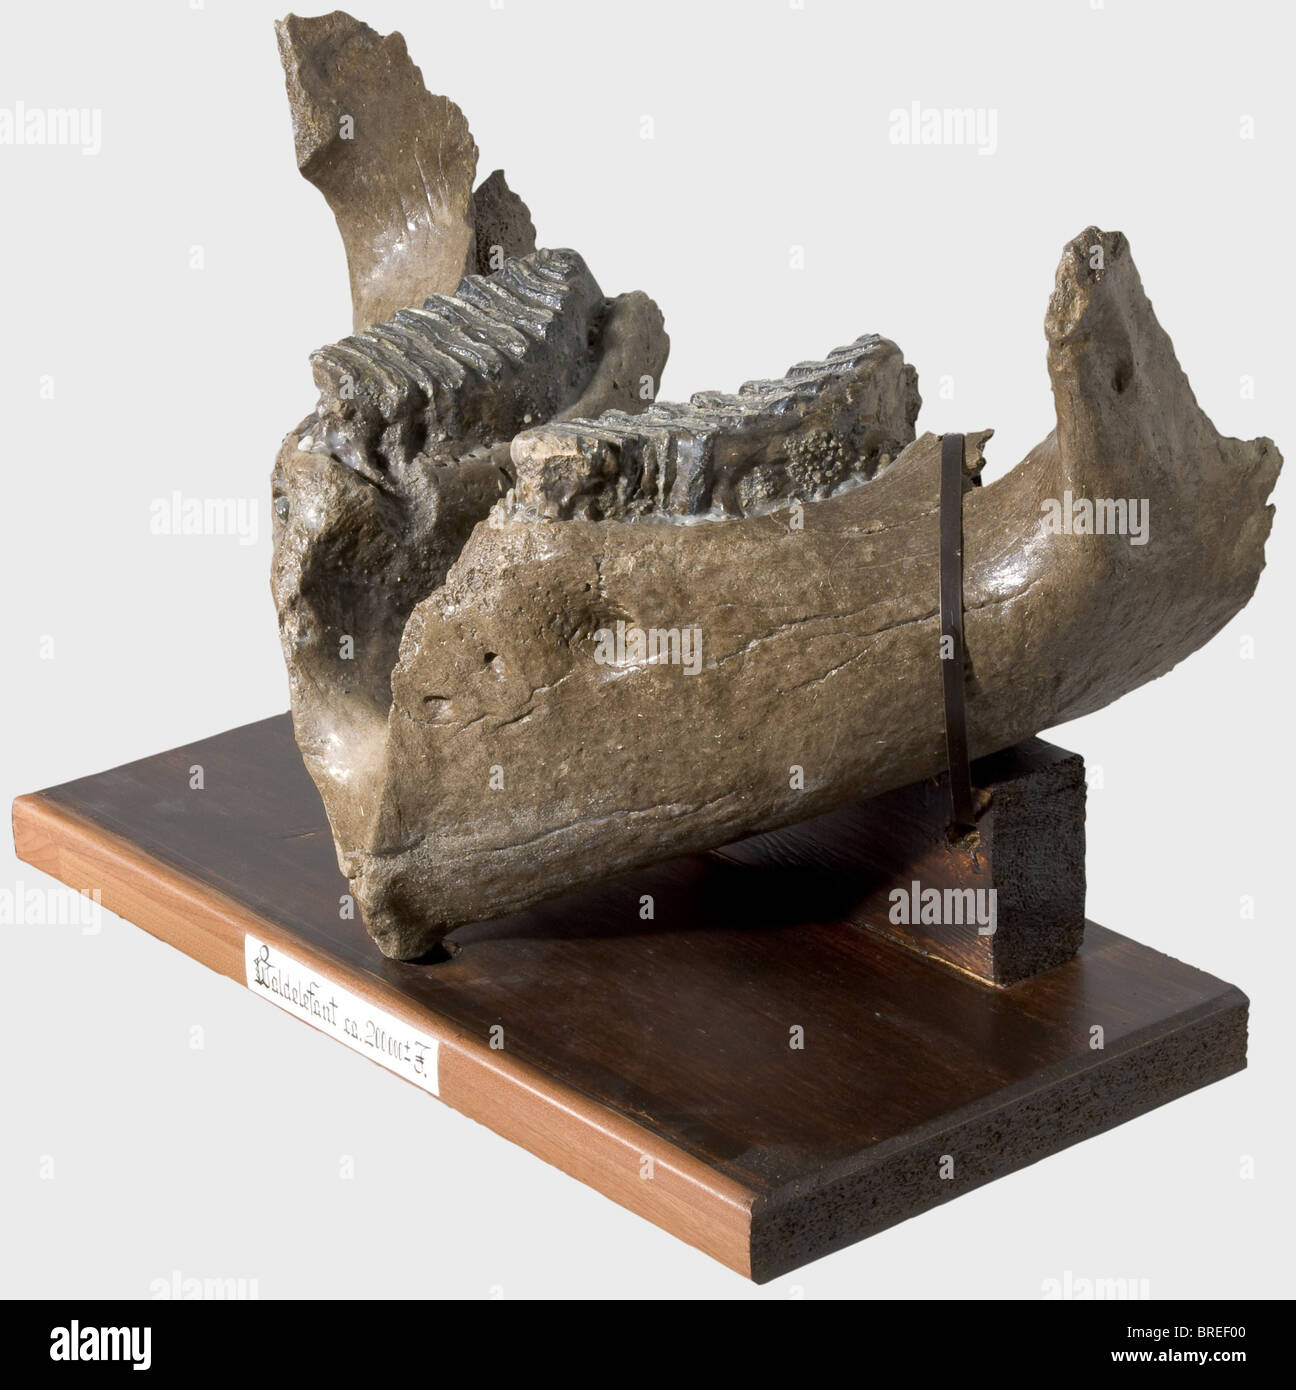 A lower jaw of a Central European straight-tusked elephant, ca. 200,000 years old Sturdy lower jaw of a straight-tusked elephant (Elephas antiquus) with two preserved, serrated molars. Mounted on a wooden base. Width 55 cm, length 34 cm. The straight-tusked elephant inhabited Europe and the Near East during the Middle and Late Pleistocene. Just like today's existing elephant species, the lower jaw of the Elephas antiquus featured fewer teeth. It had a shoulder height of 4,2 meter and was thus larger than the woolly mammoth. historic, historical, prehistory, han, Stock Photo